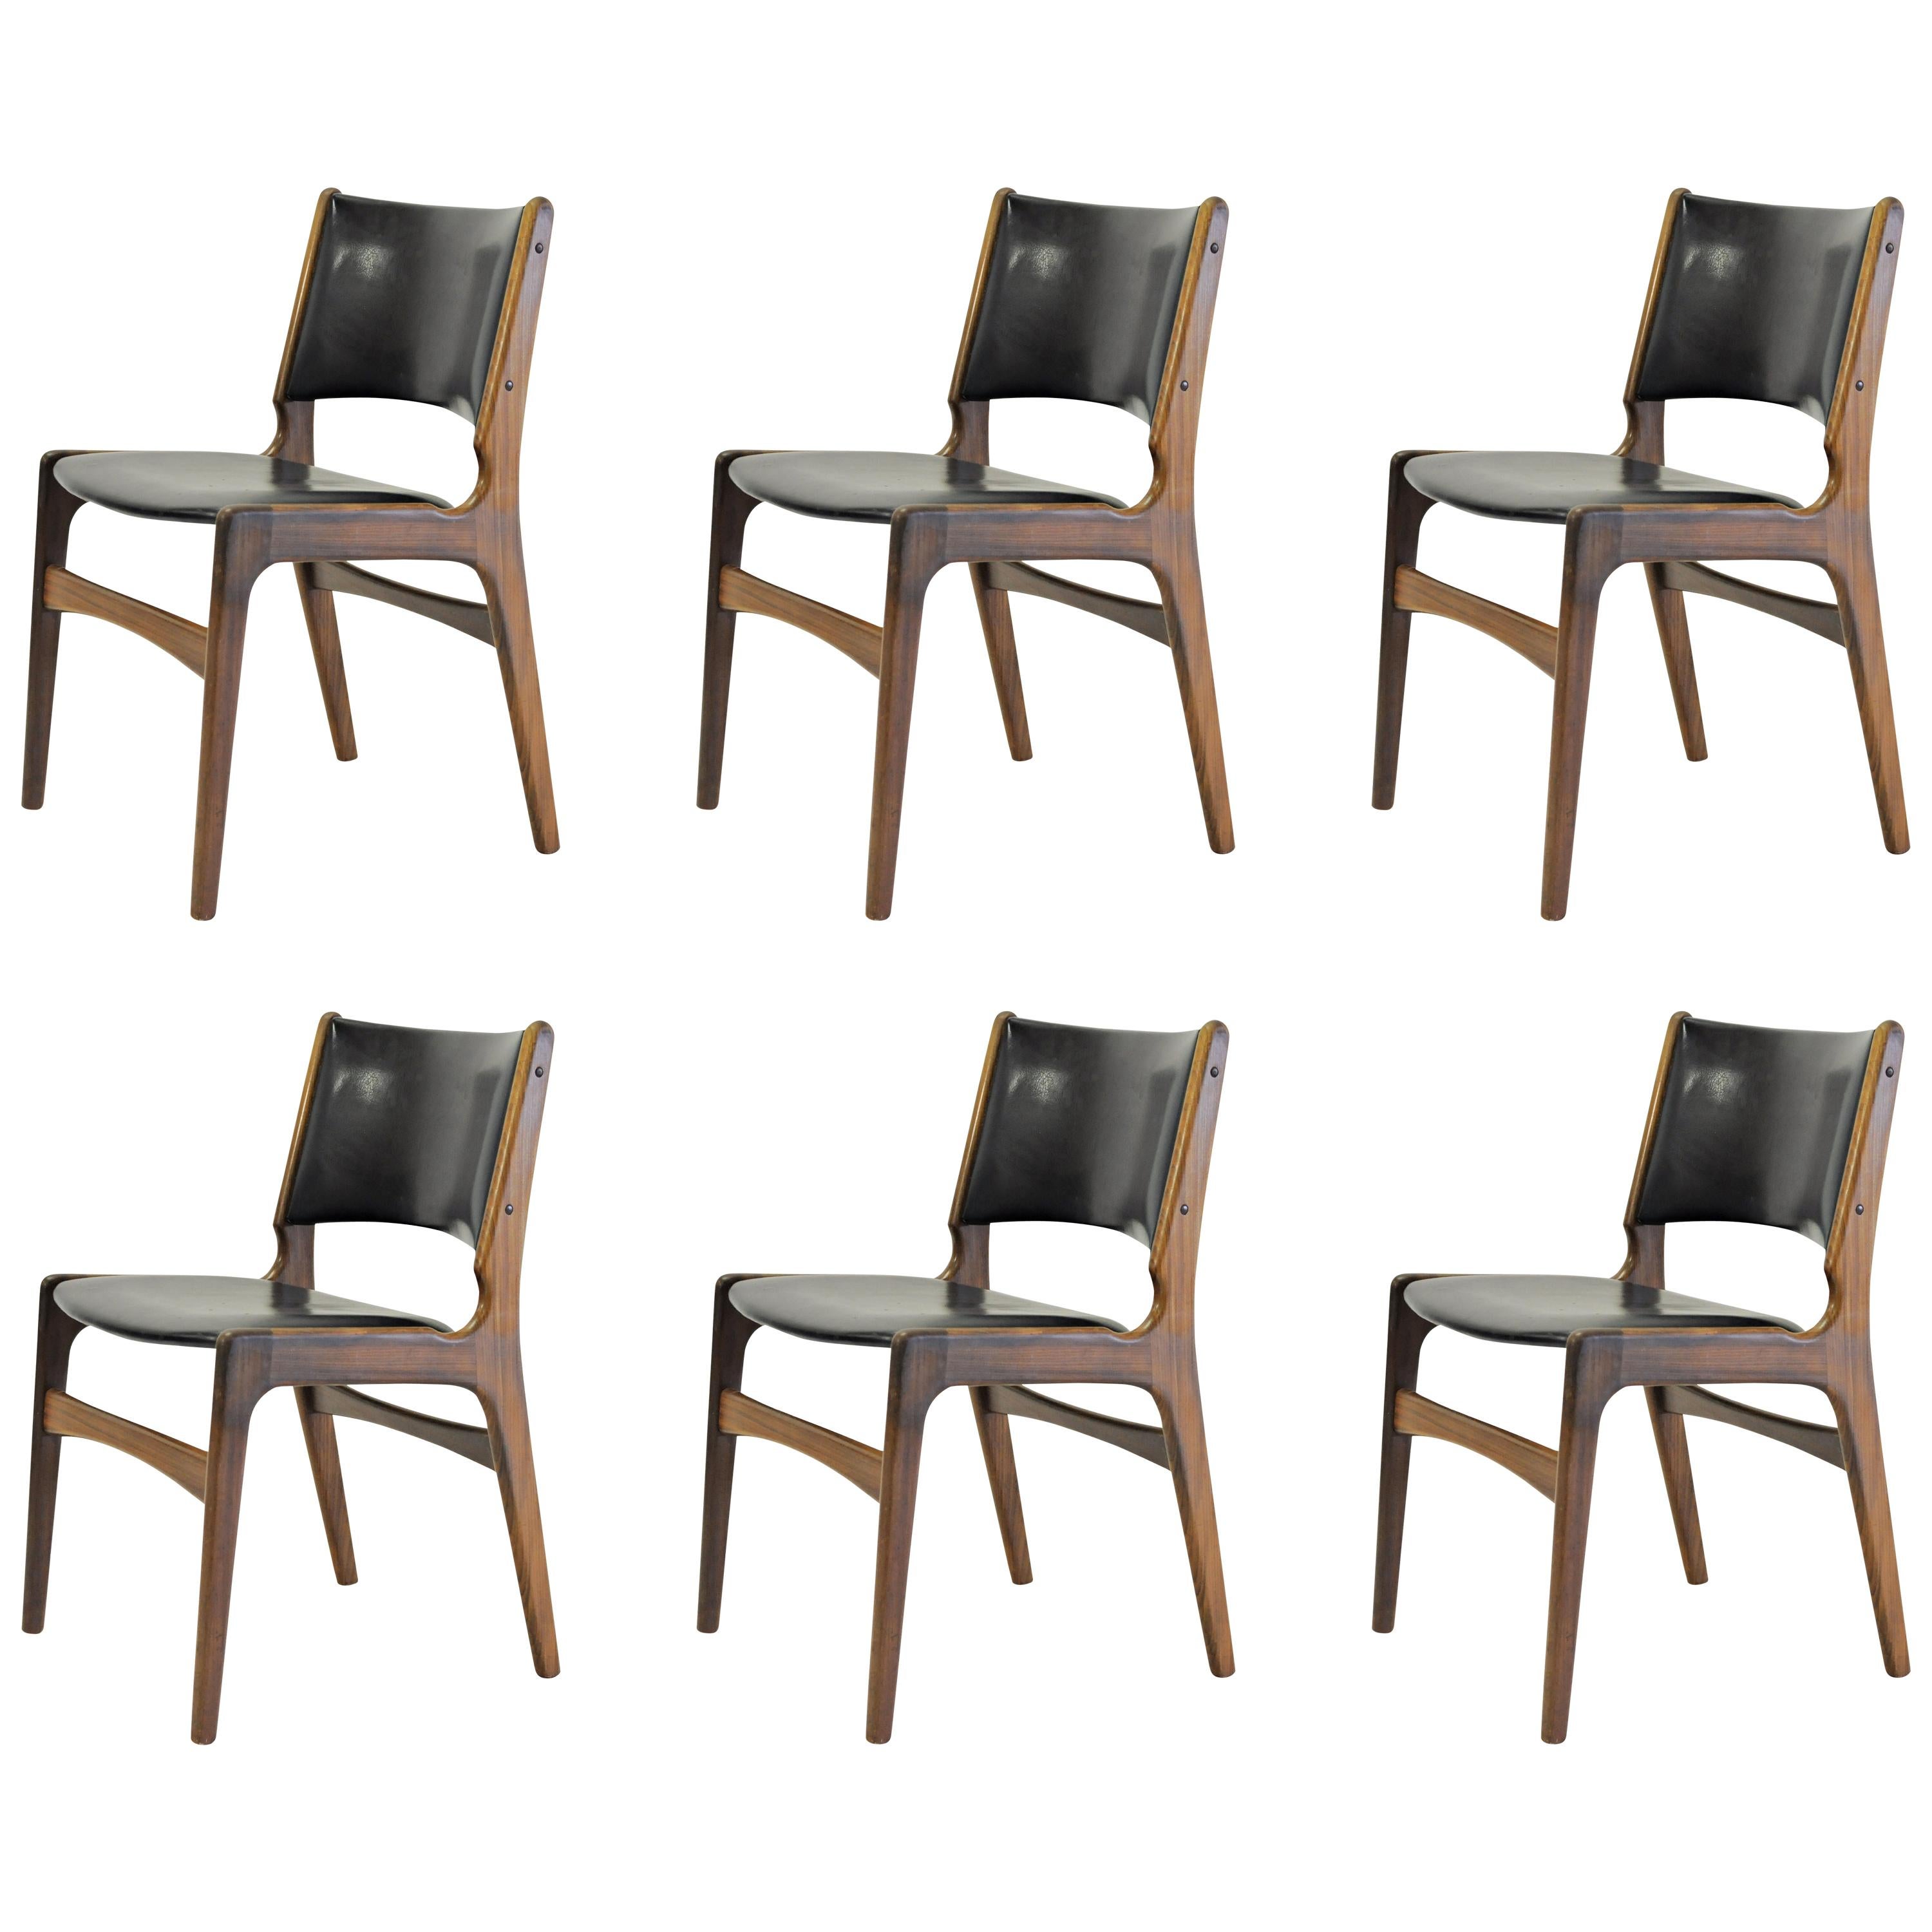 Six Erik Buch Refinished Dining Chairs in Solid Teak, Choice of Upholstery